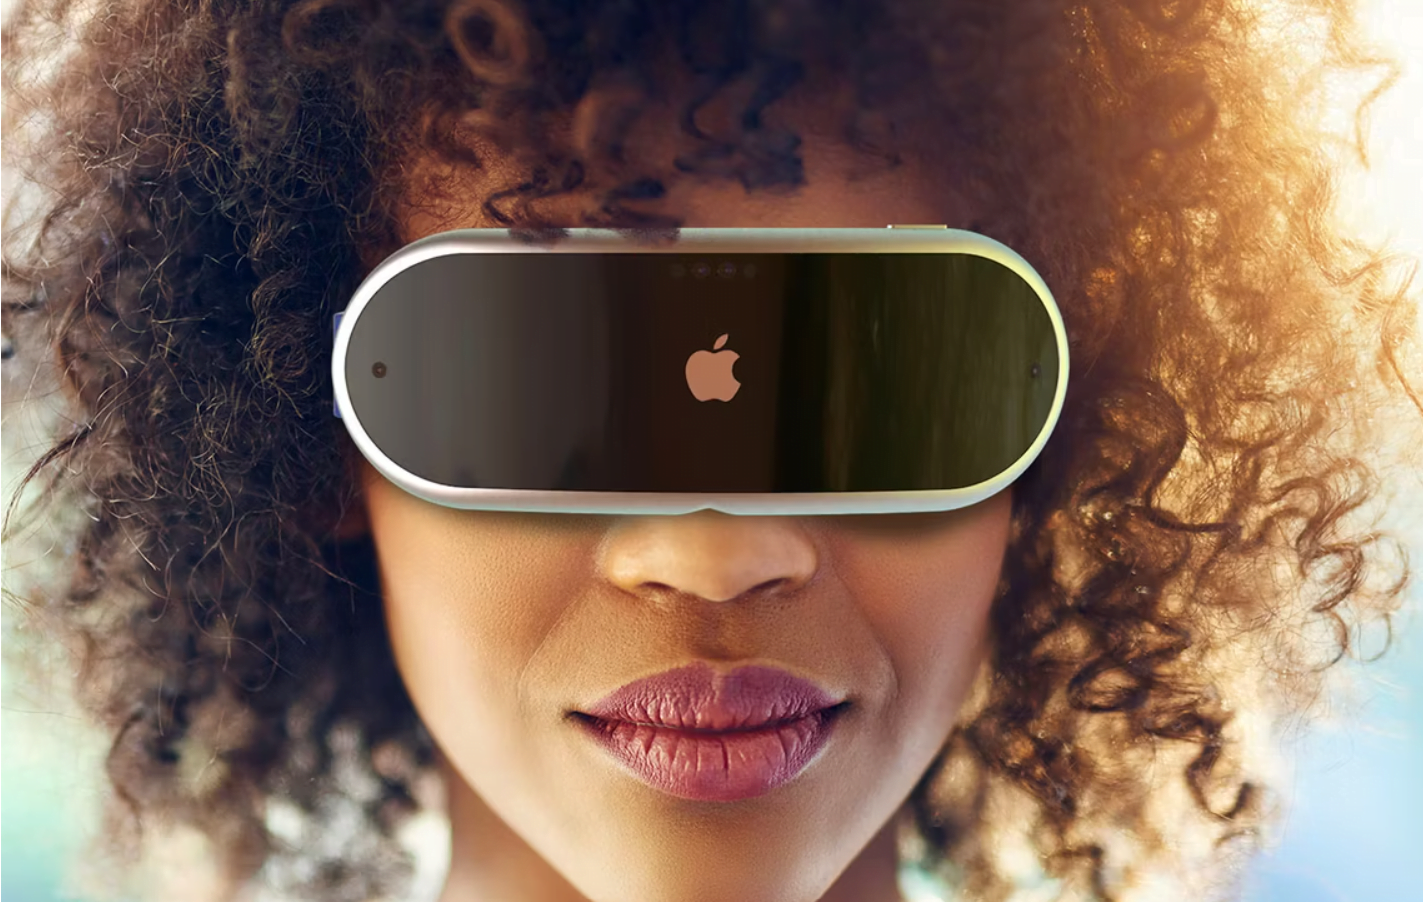 Apple Reality Pro: A Sneak Peek into the Next Generation of AR/VR Headsets